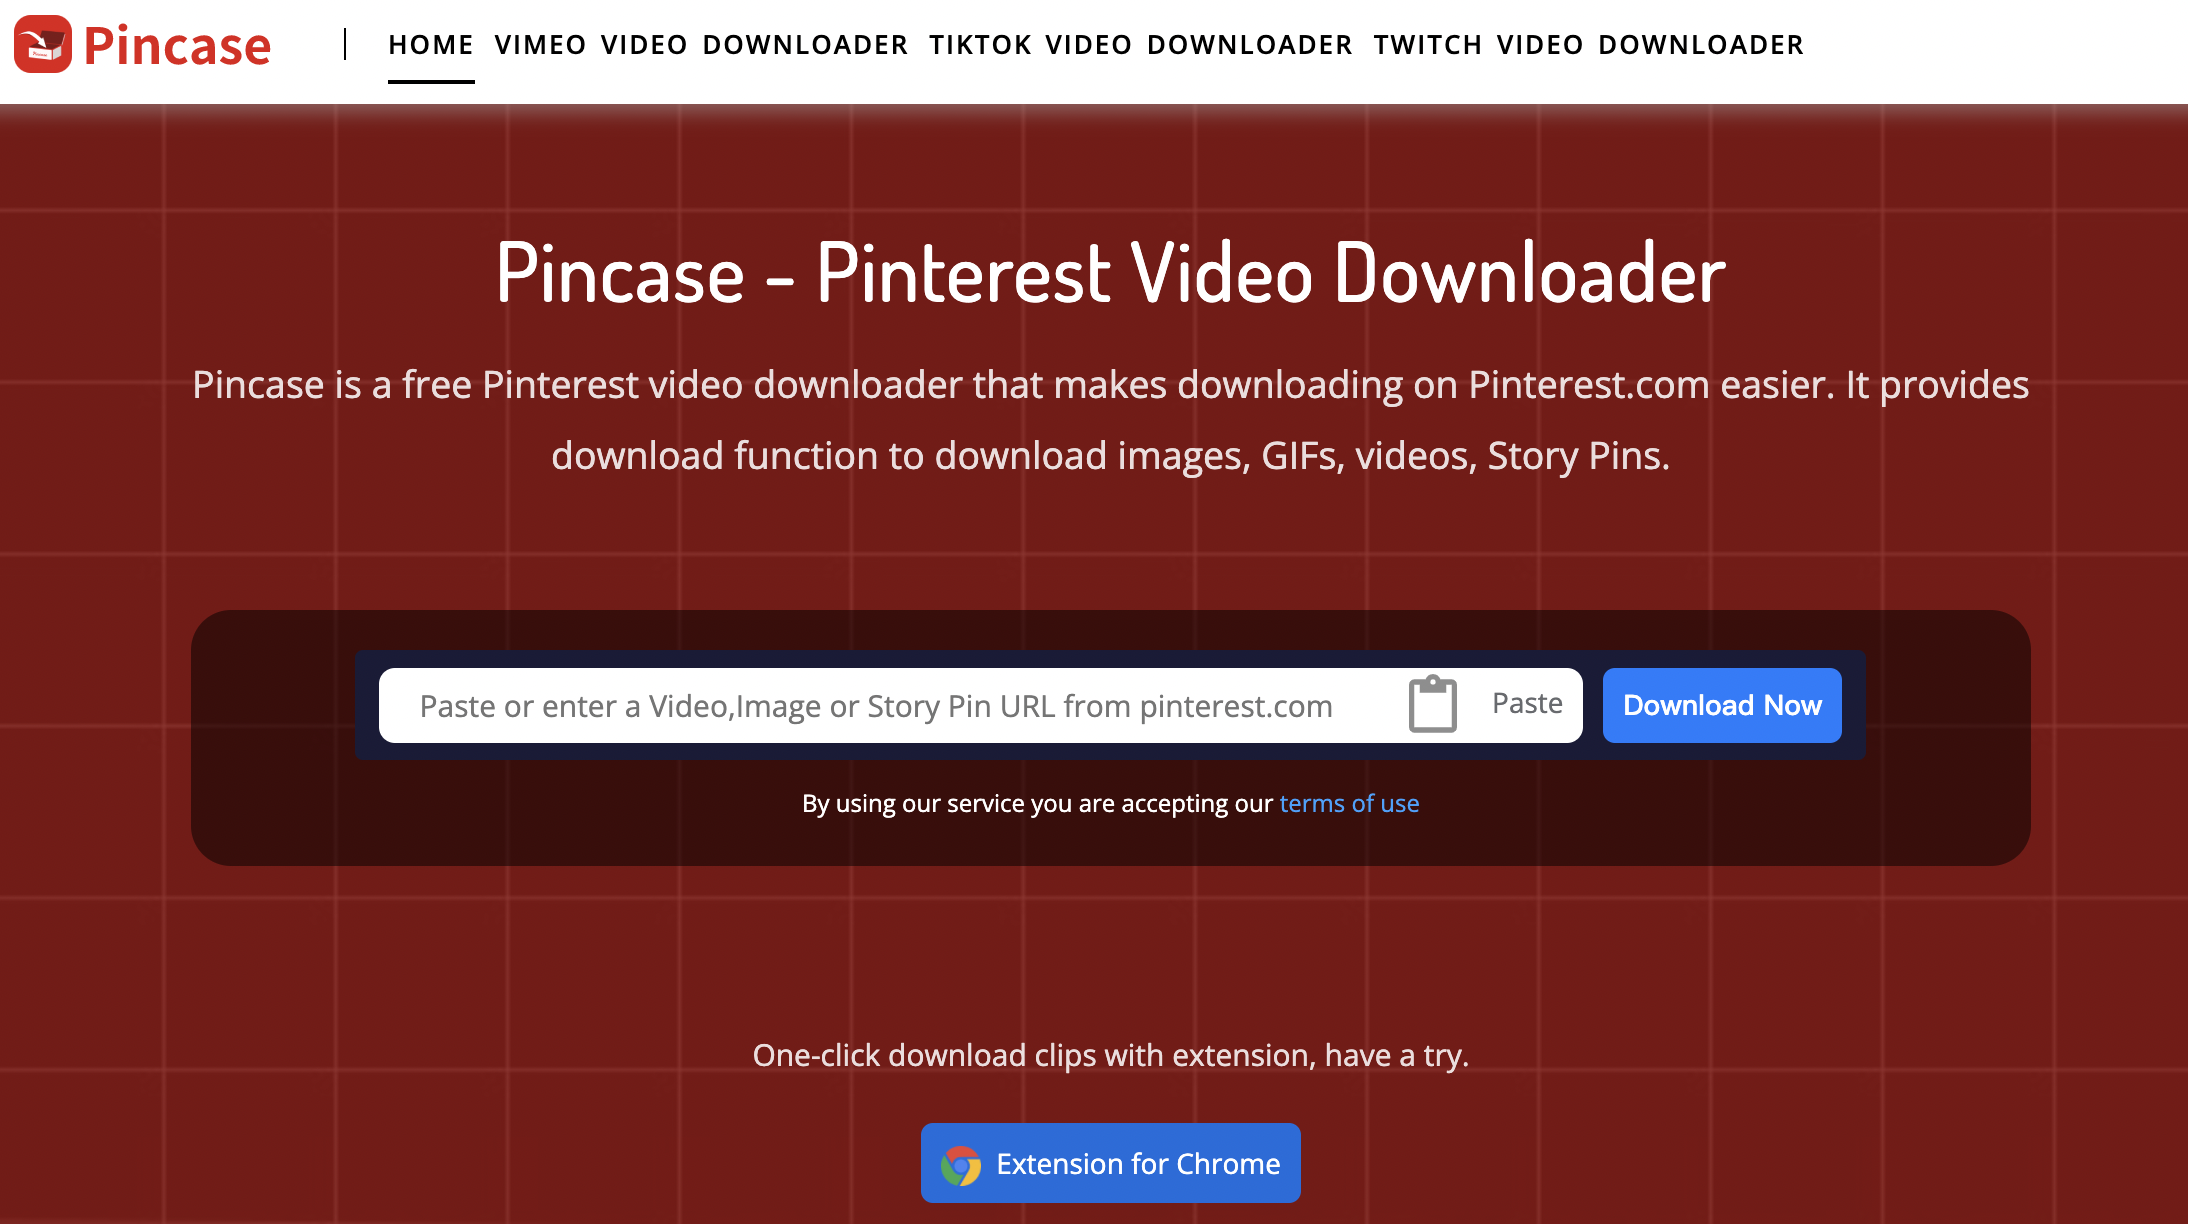 How to use Pincase Online Downloader? 